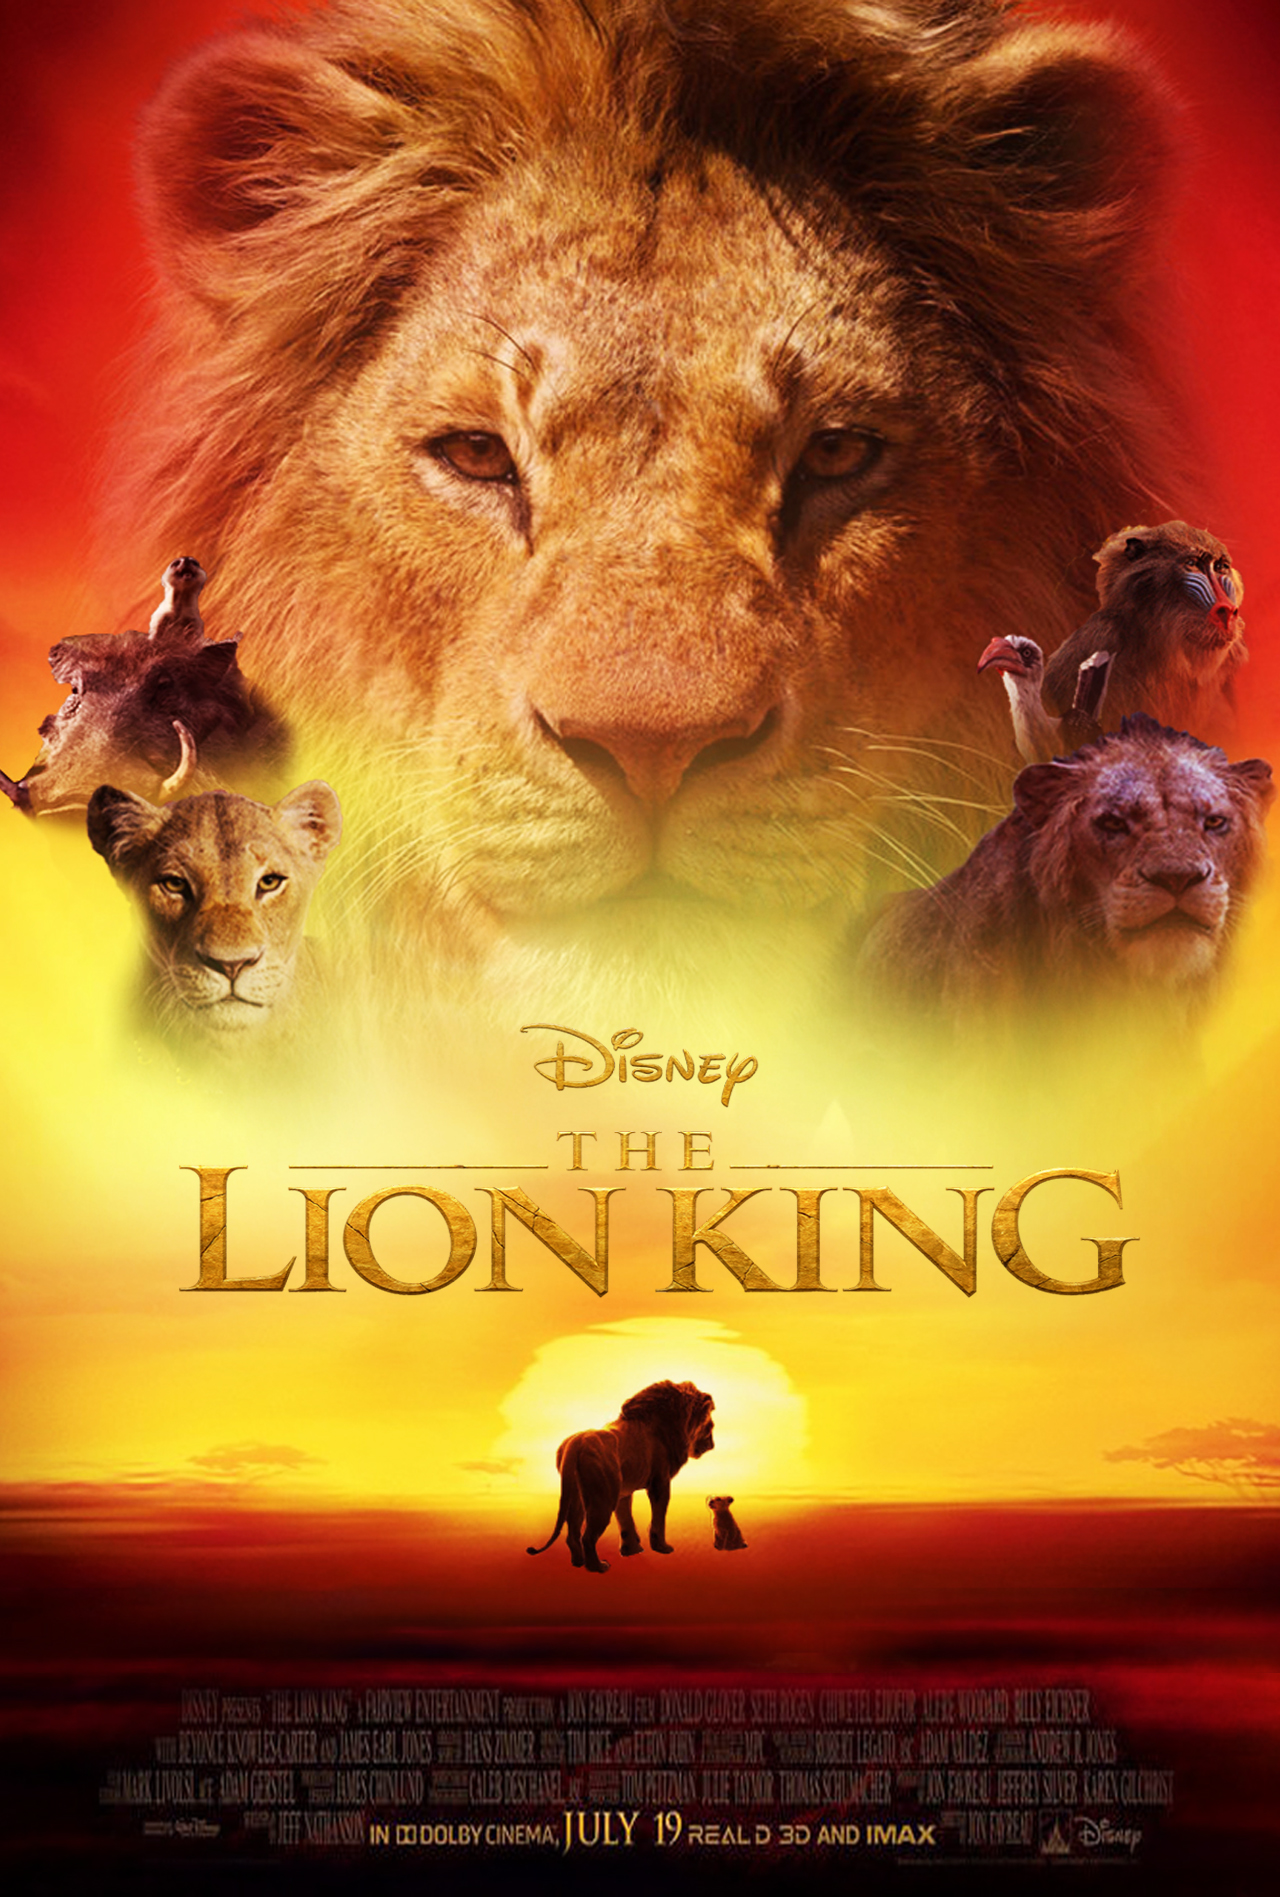 Half Term Movie The Lion King Pg 19 National Museum Wales